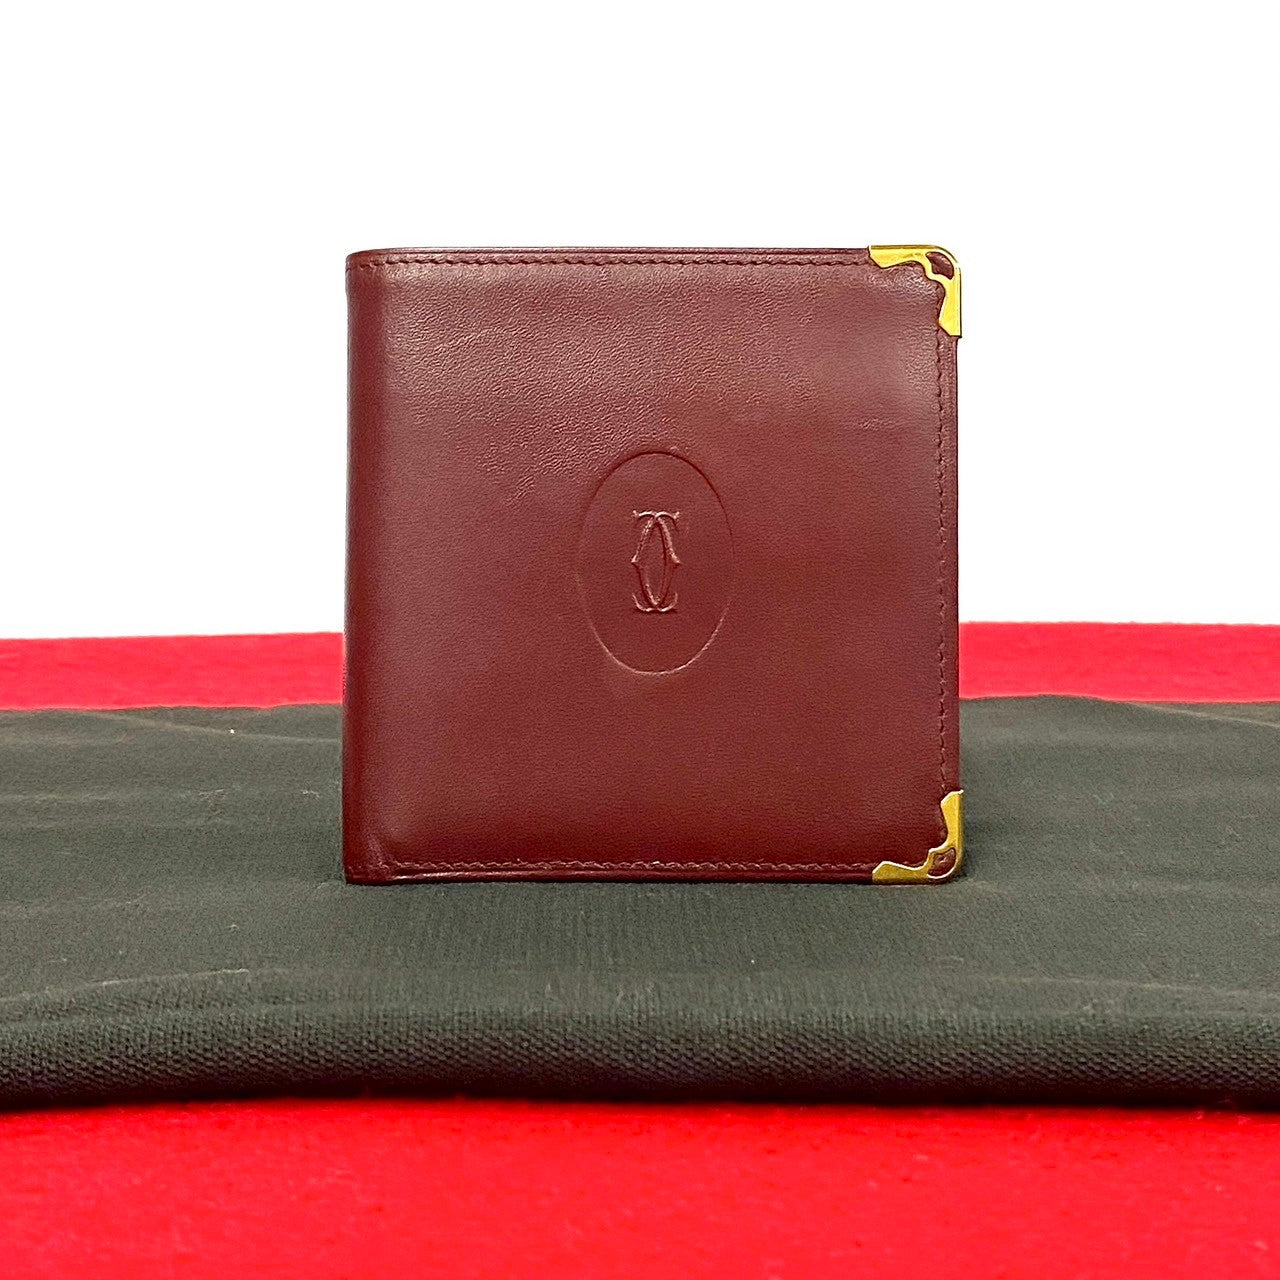 Cartier Must De Cartier Leather Bifold Wallet Leather Short Wallet in Good condition